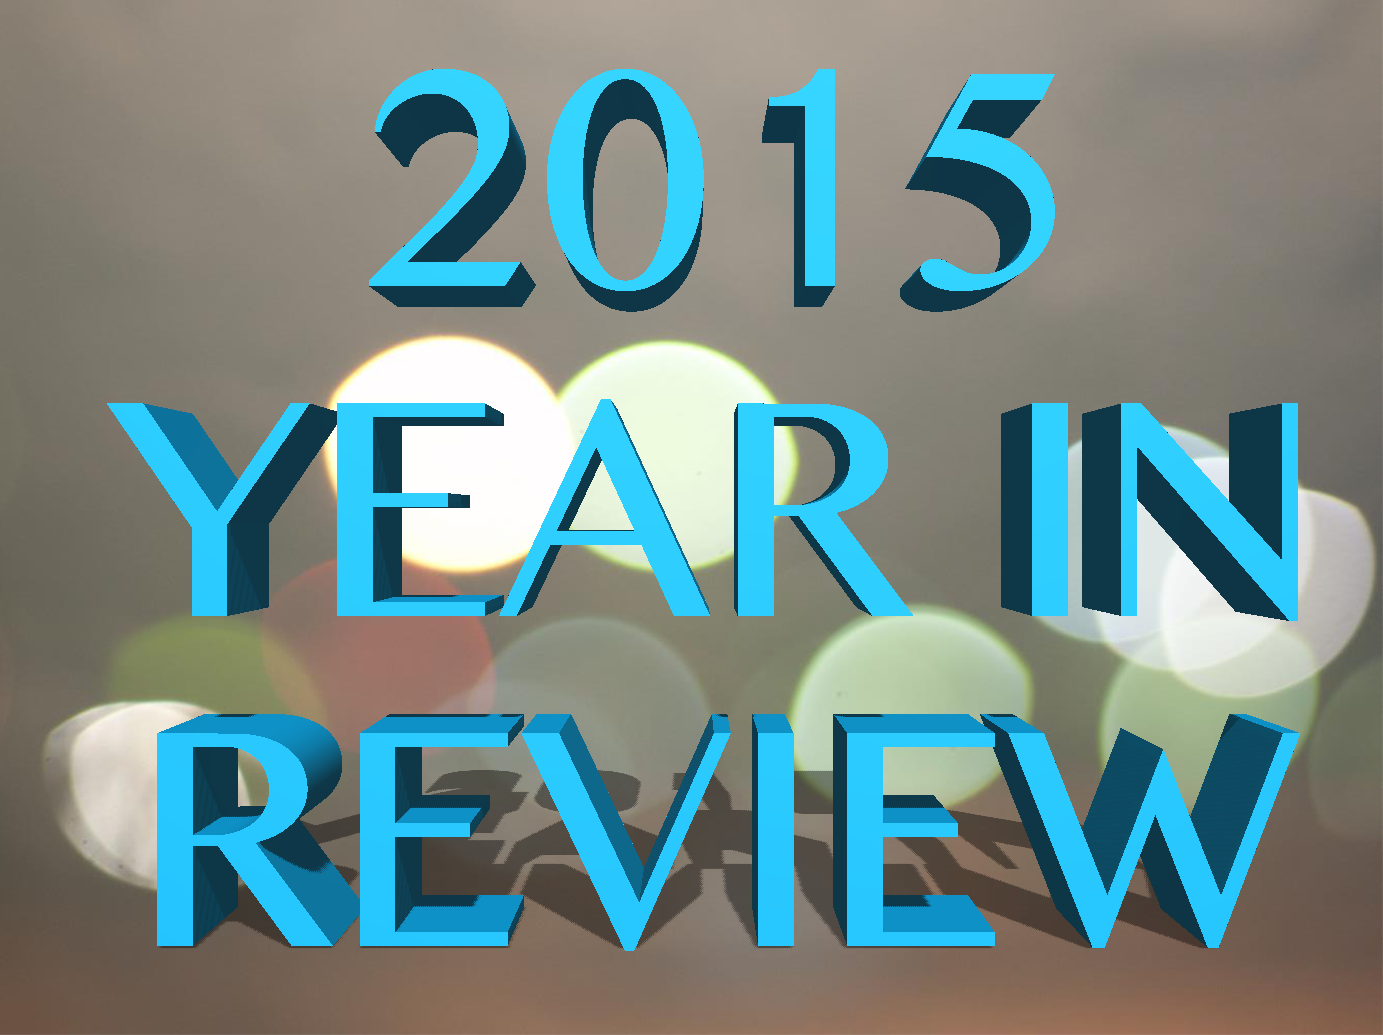 2015 YEAR IN REVIEW